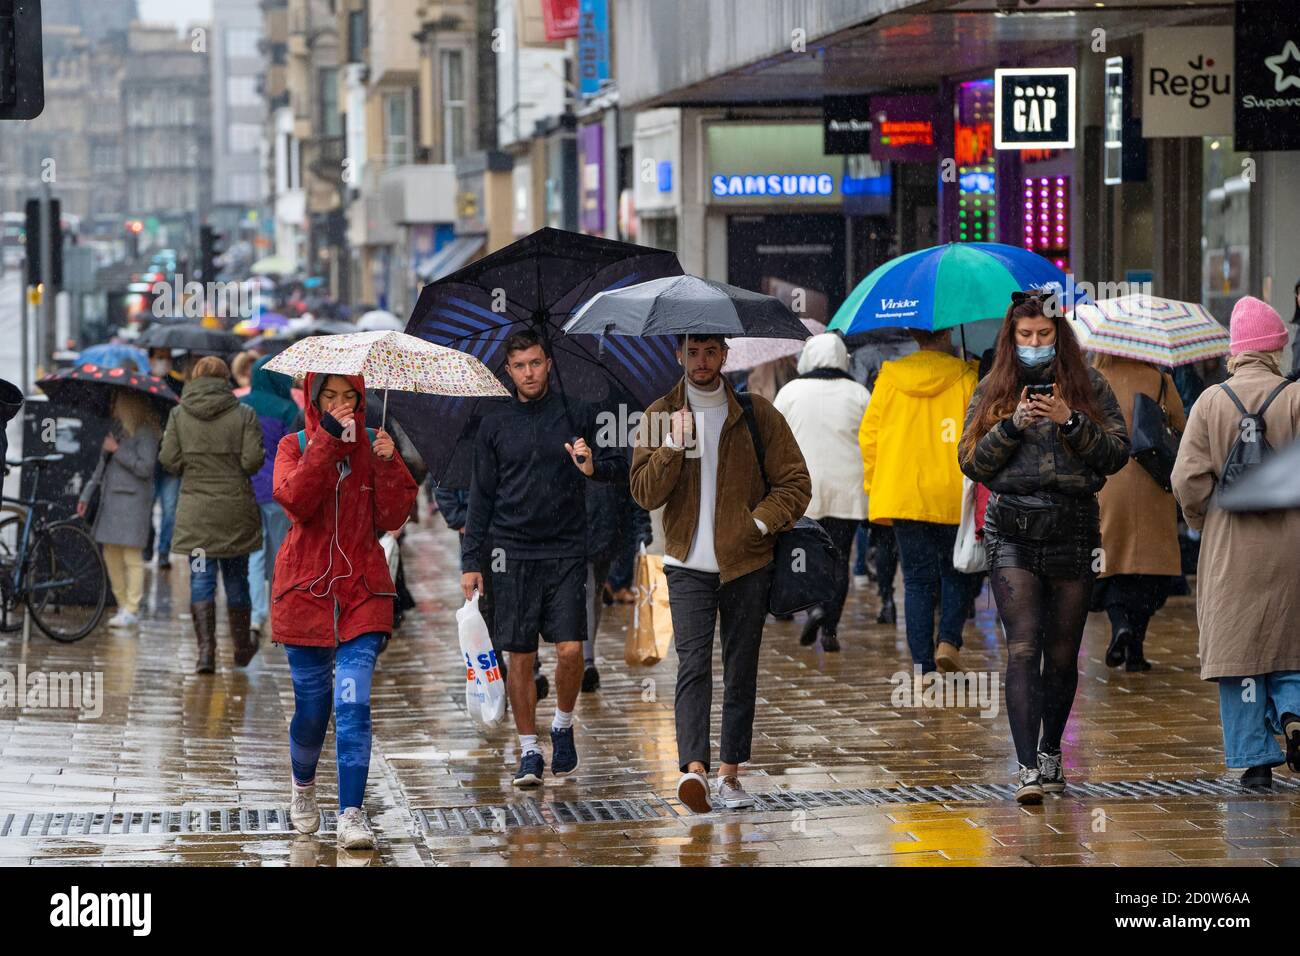 Edinburgh, Scotland, UK. 3 October, 2020. An amber rainfall warning for the east of Scotland did not deter many shoppers from walking along Princes Street in Edinburgh today. Persistent heavy rain fell throughout the morning and afternoon. Iain Masterton/Alamy Live News Stock Photo